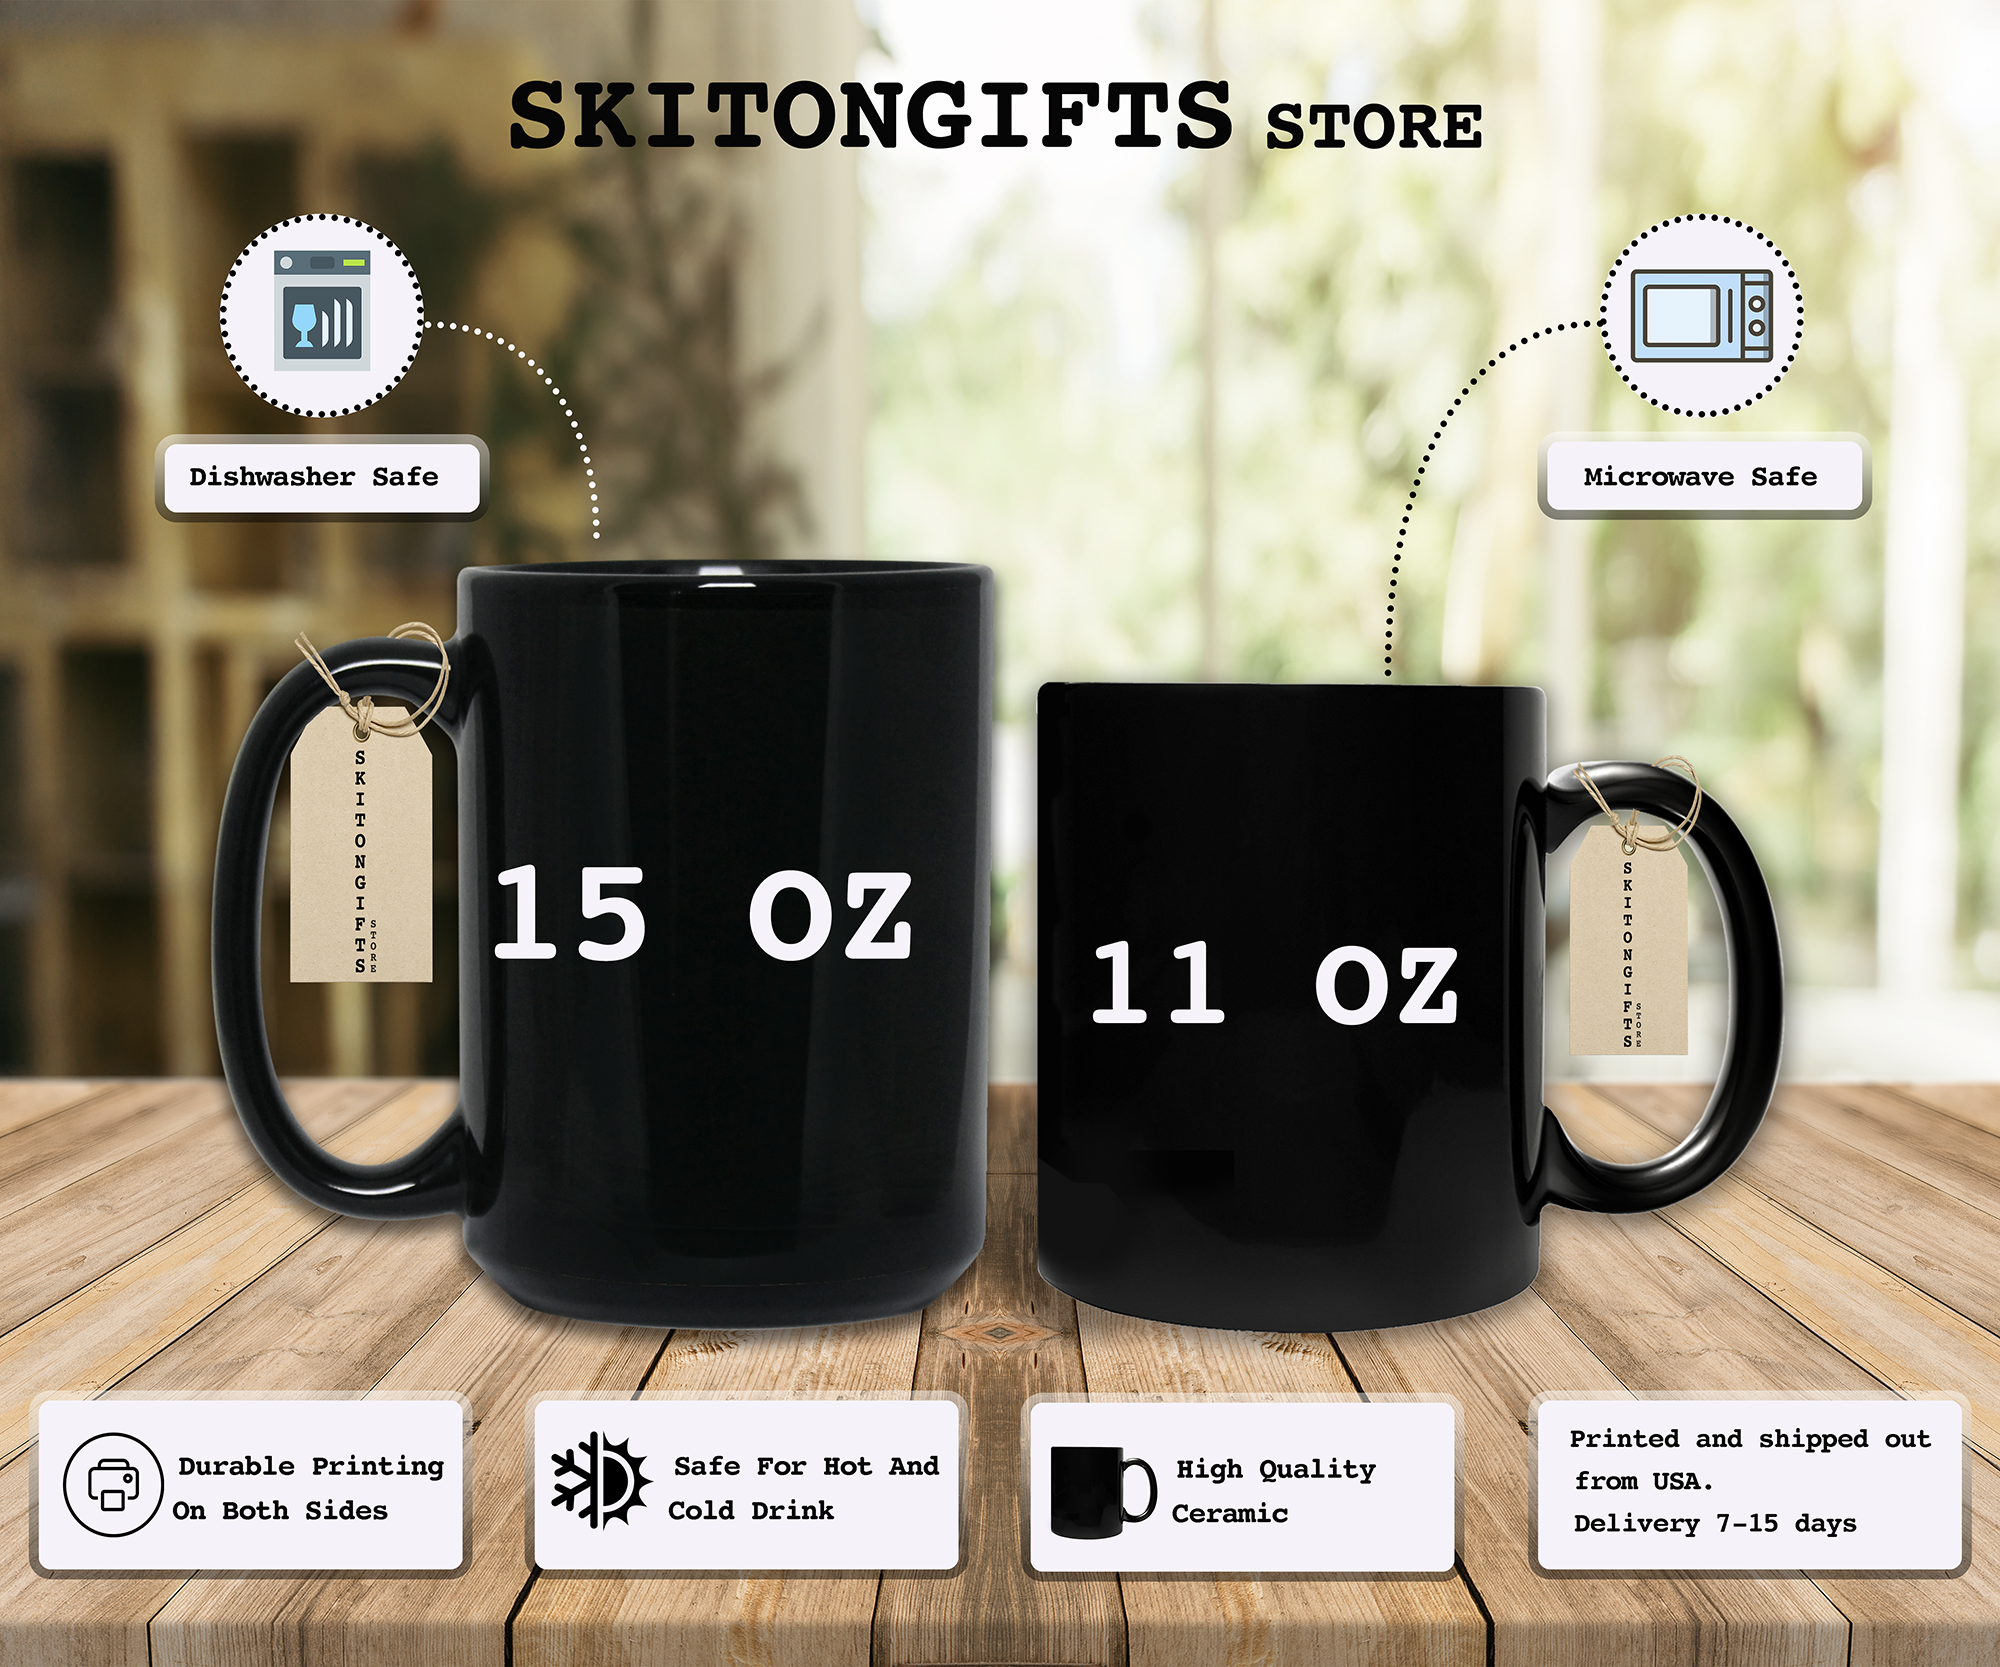 Skitongifts Funny Ceramic Novelty Coffee Mug Being My Fiance Is Really The Only You Need  Love You Funny For Best Fiance Christmas Birthday 46U7cIo